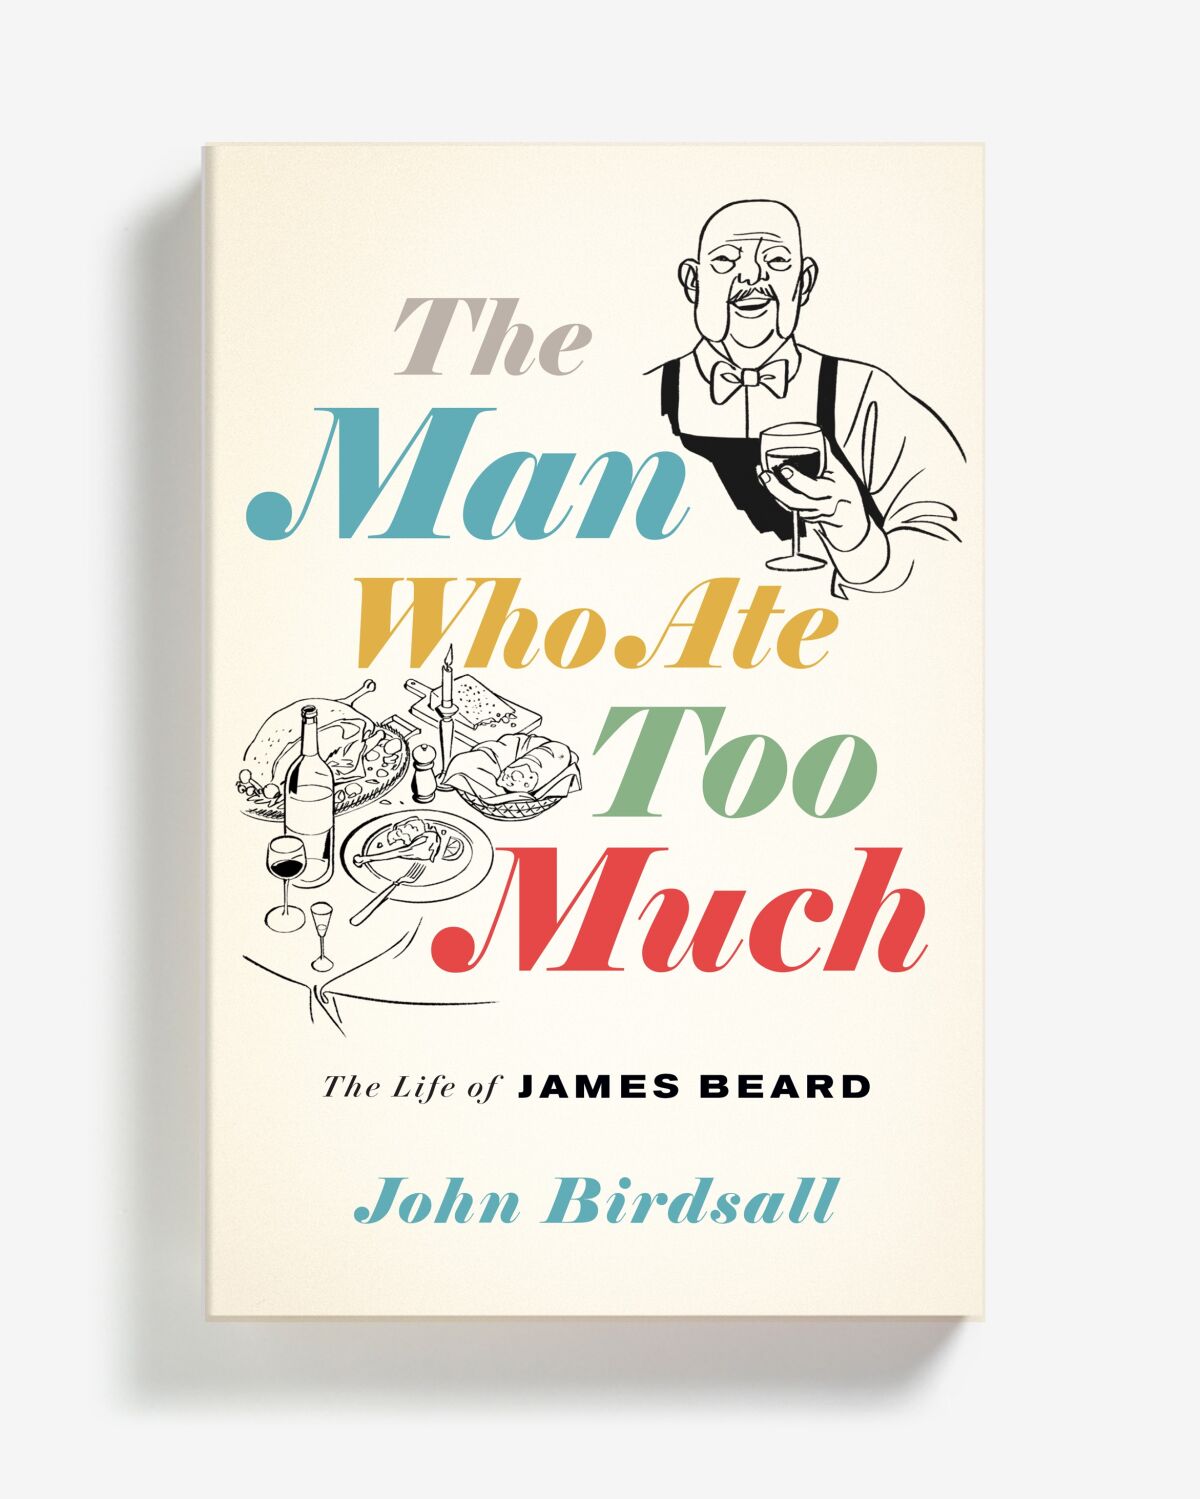 John Birdsall is the author of "The Man Who Ate Too Much," a new biography of James Beard.